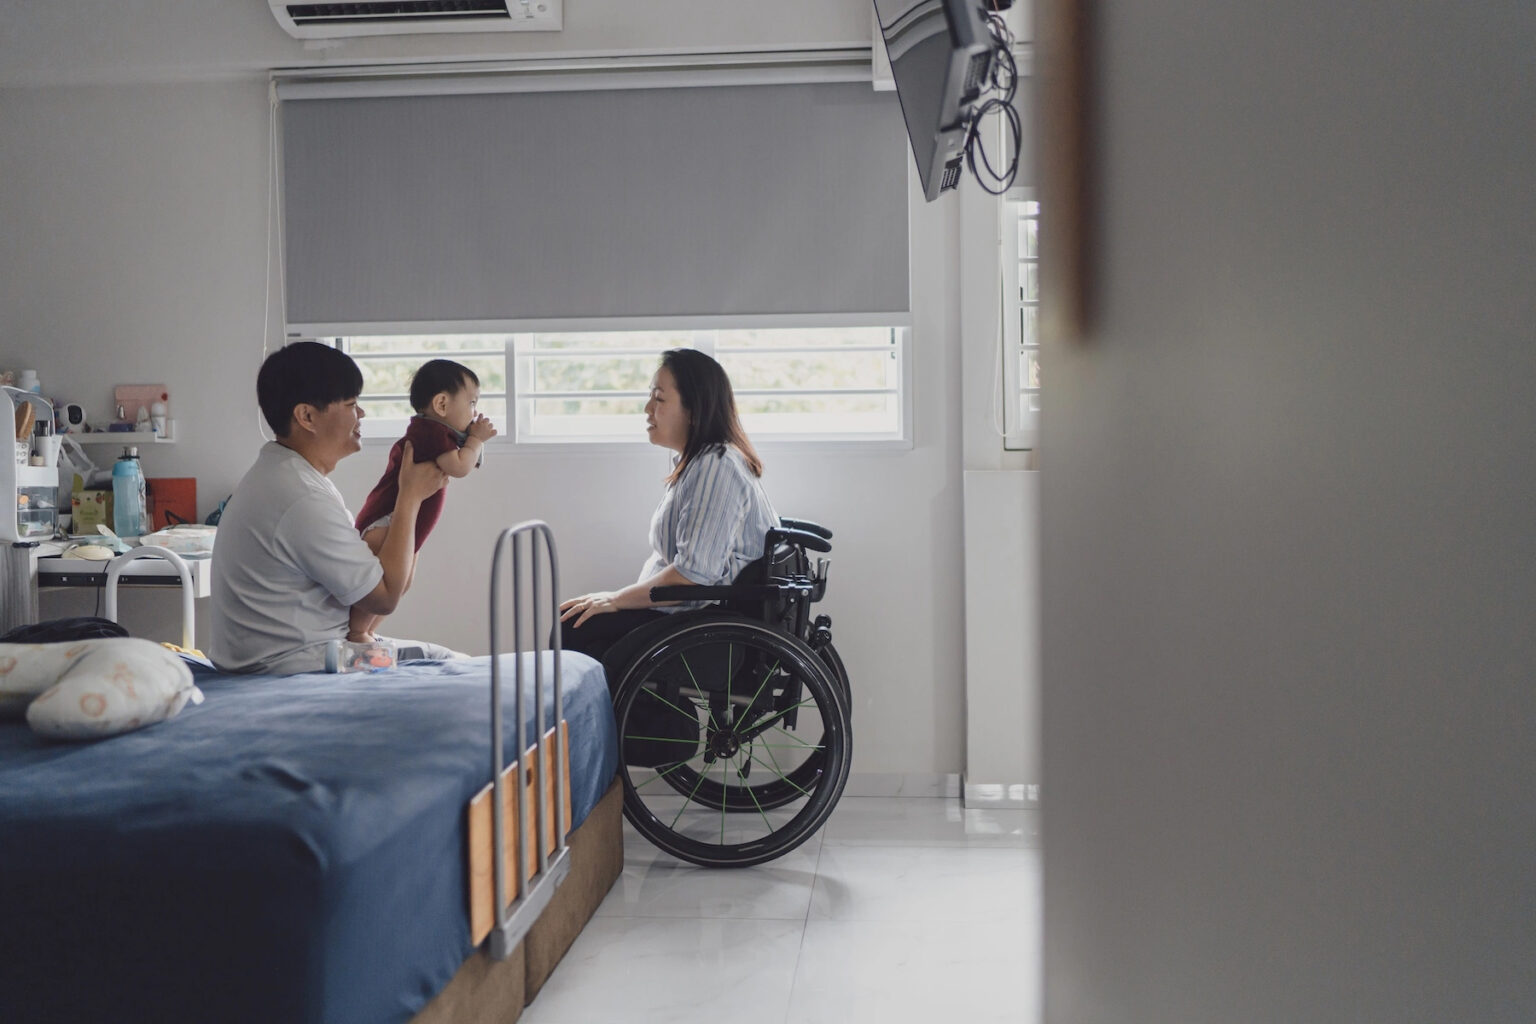 A young family spends time together in a sunny hospital room, the mother is in a wheelchair